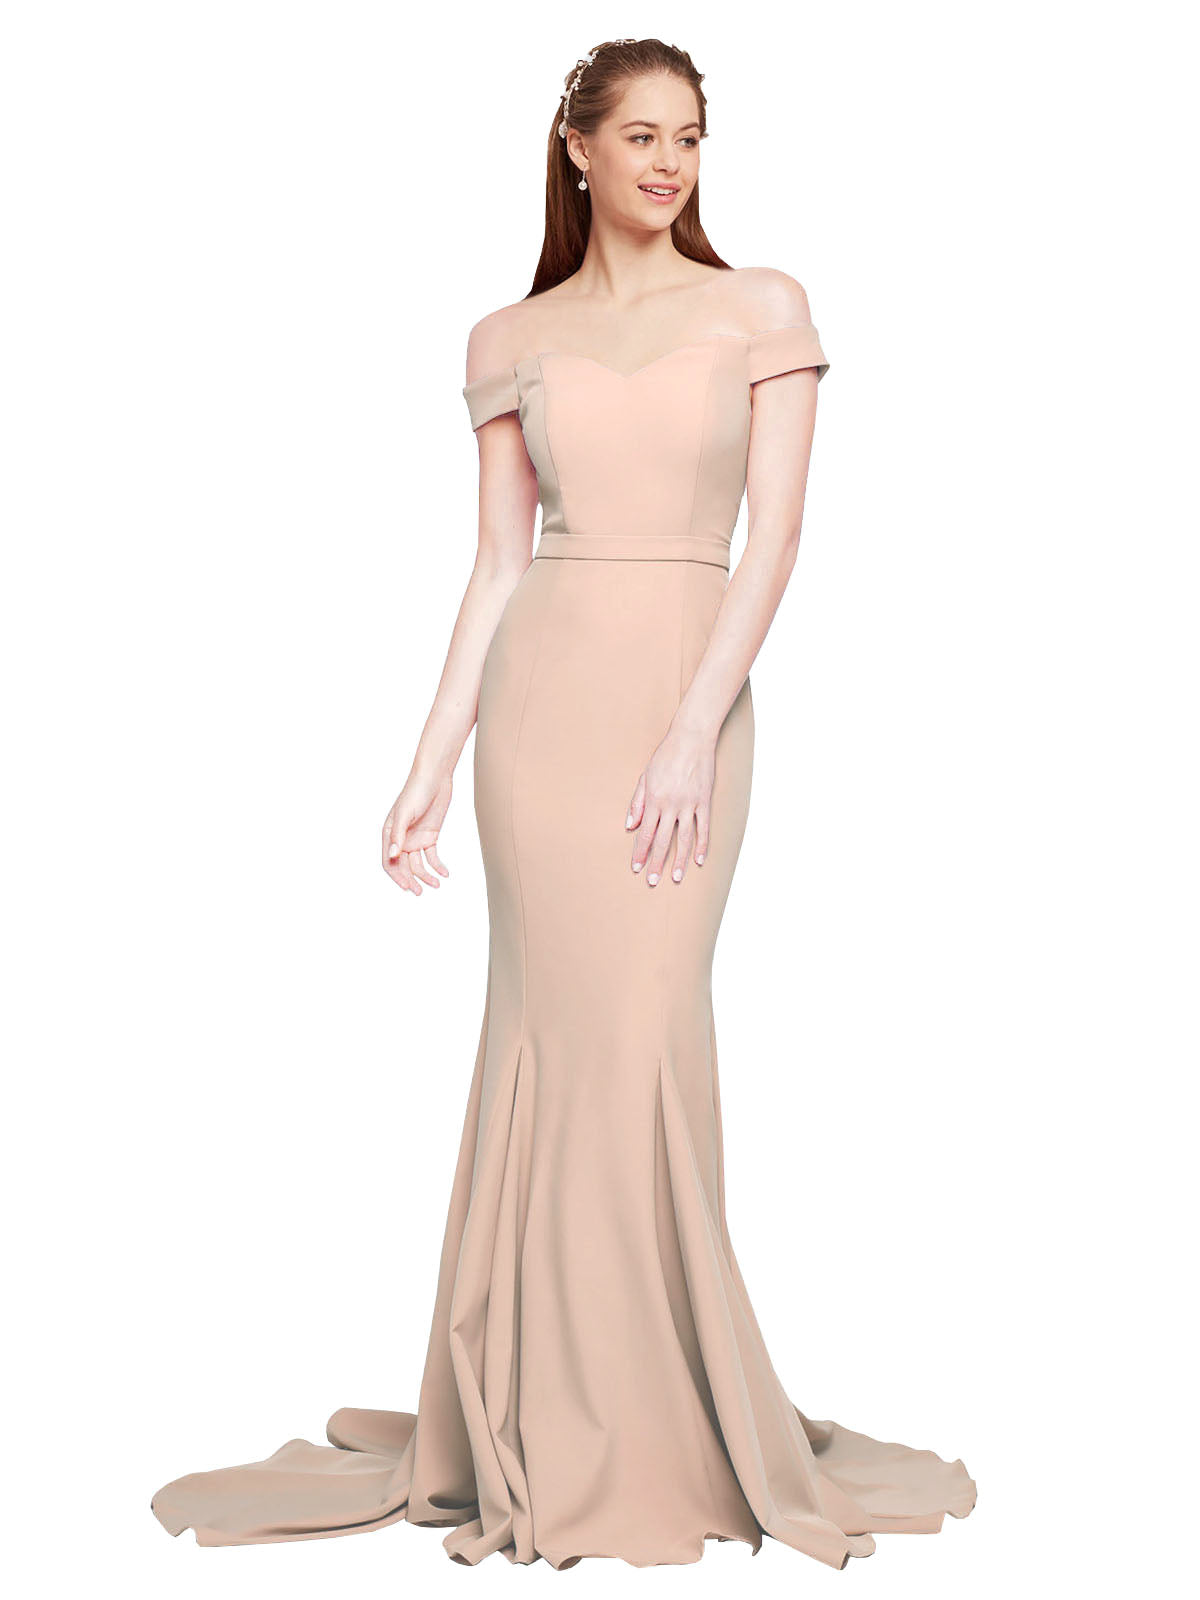 RightBrides Jannet Long Mermaid Off the Shoulder Sweetheart Sweep Train Floor Length Sleeveless Champagne Stretch Crepe Bridesmaid Dress